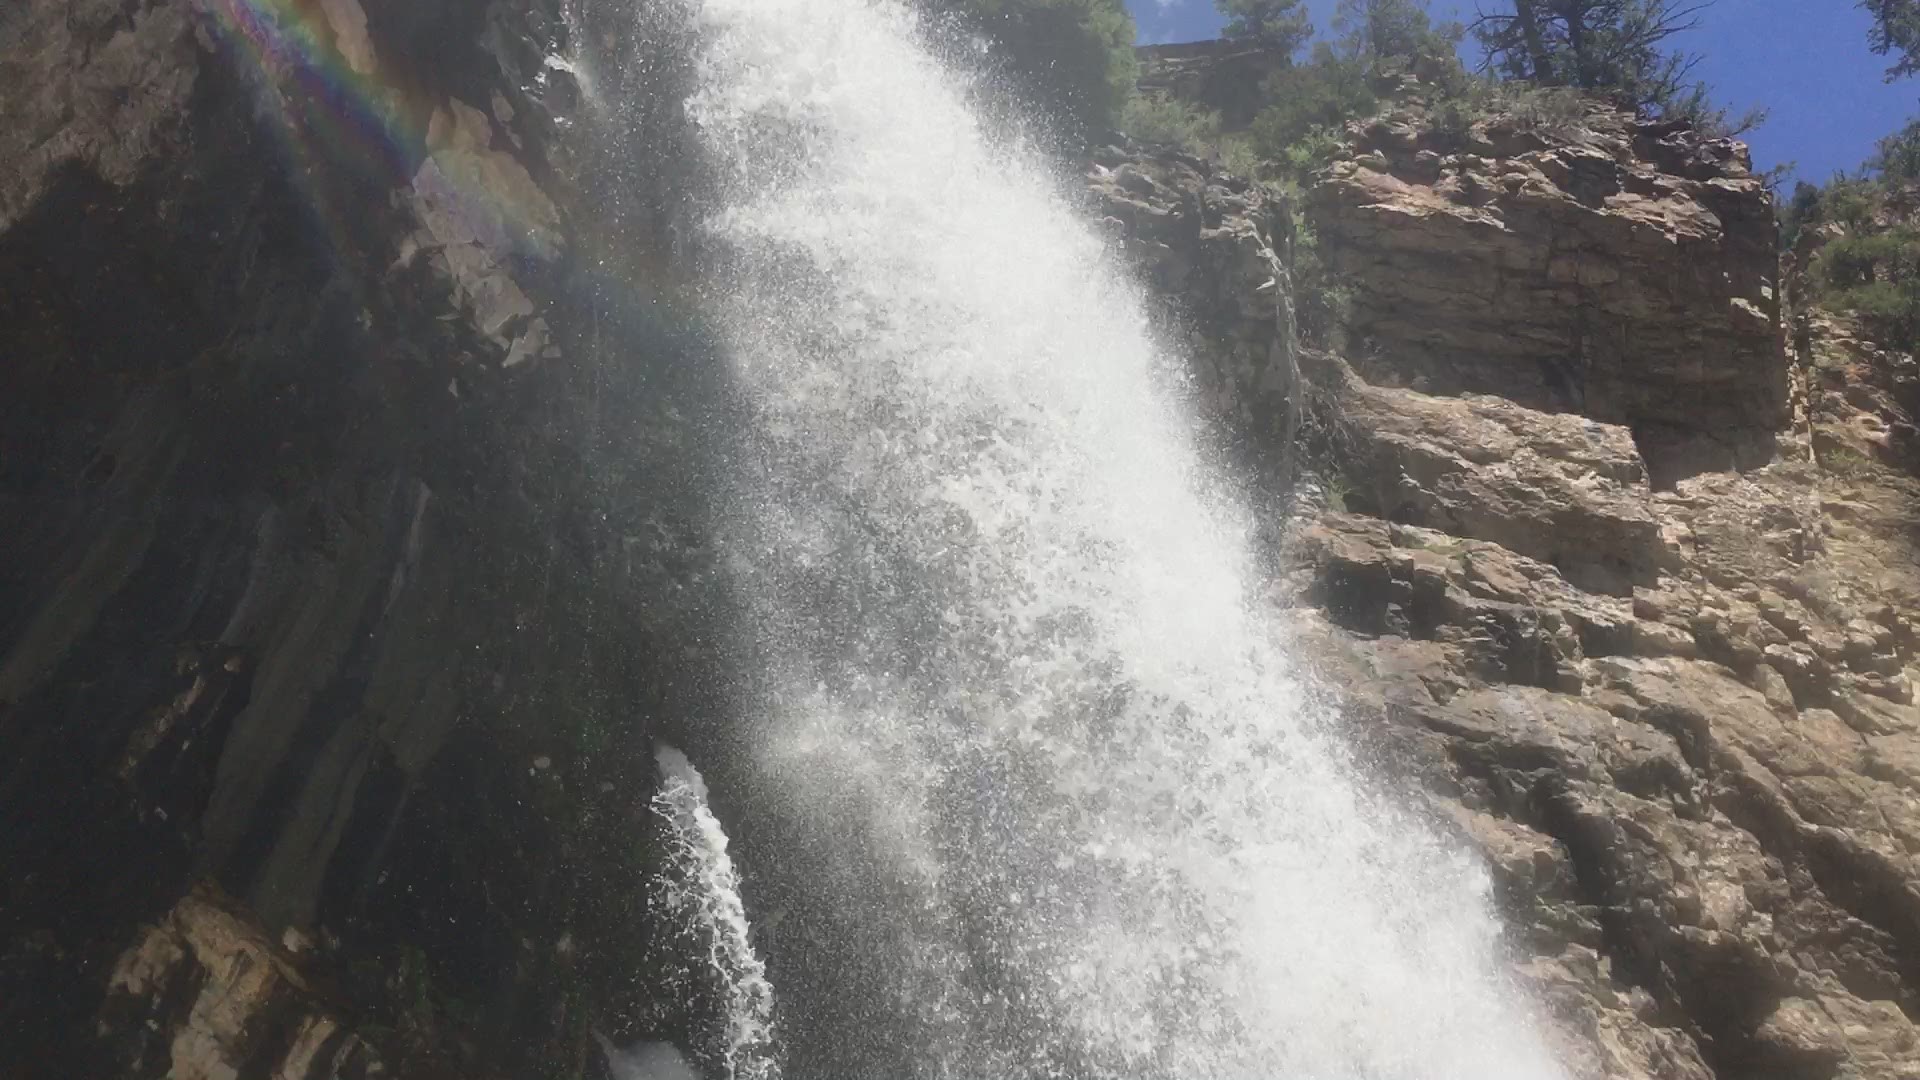 Spouting Rock flowing at full force right behind Hanging Lake in May of 2019